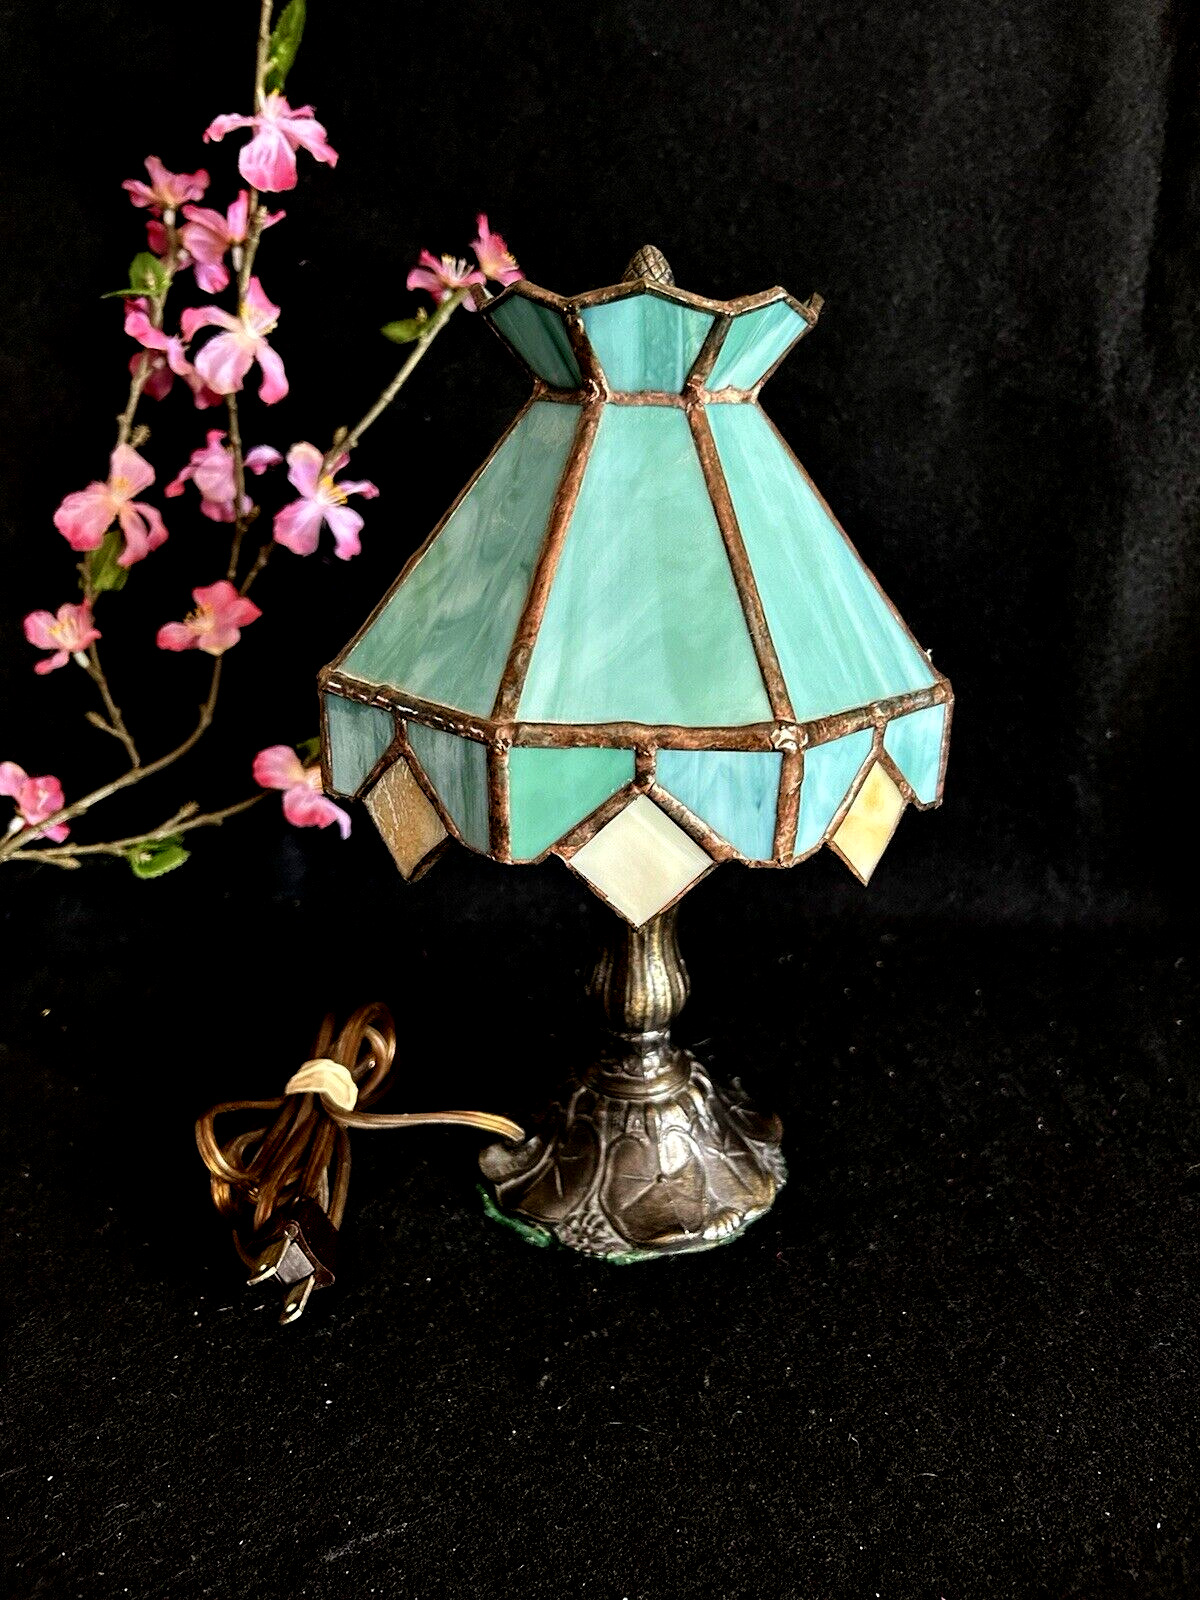 Tiffany styled Stained Glass Table Lamp 11” tall Vintage